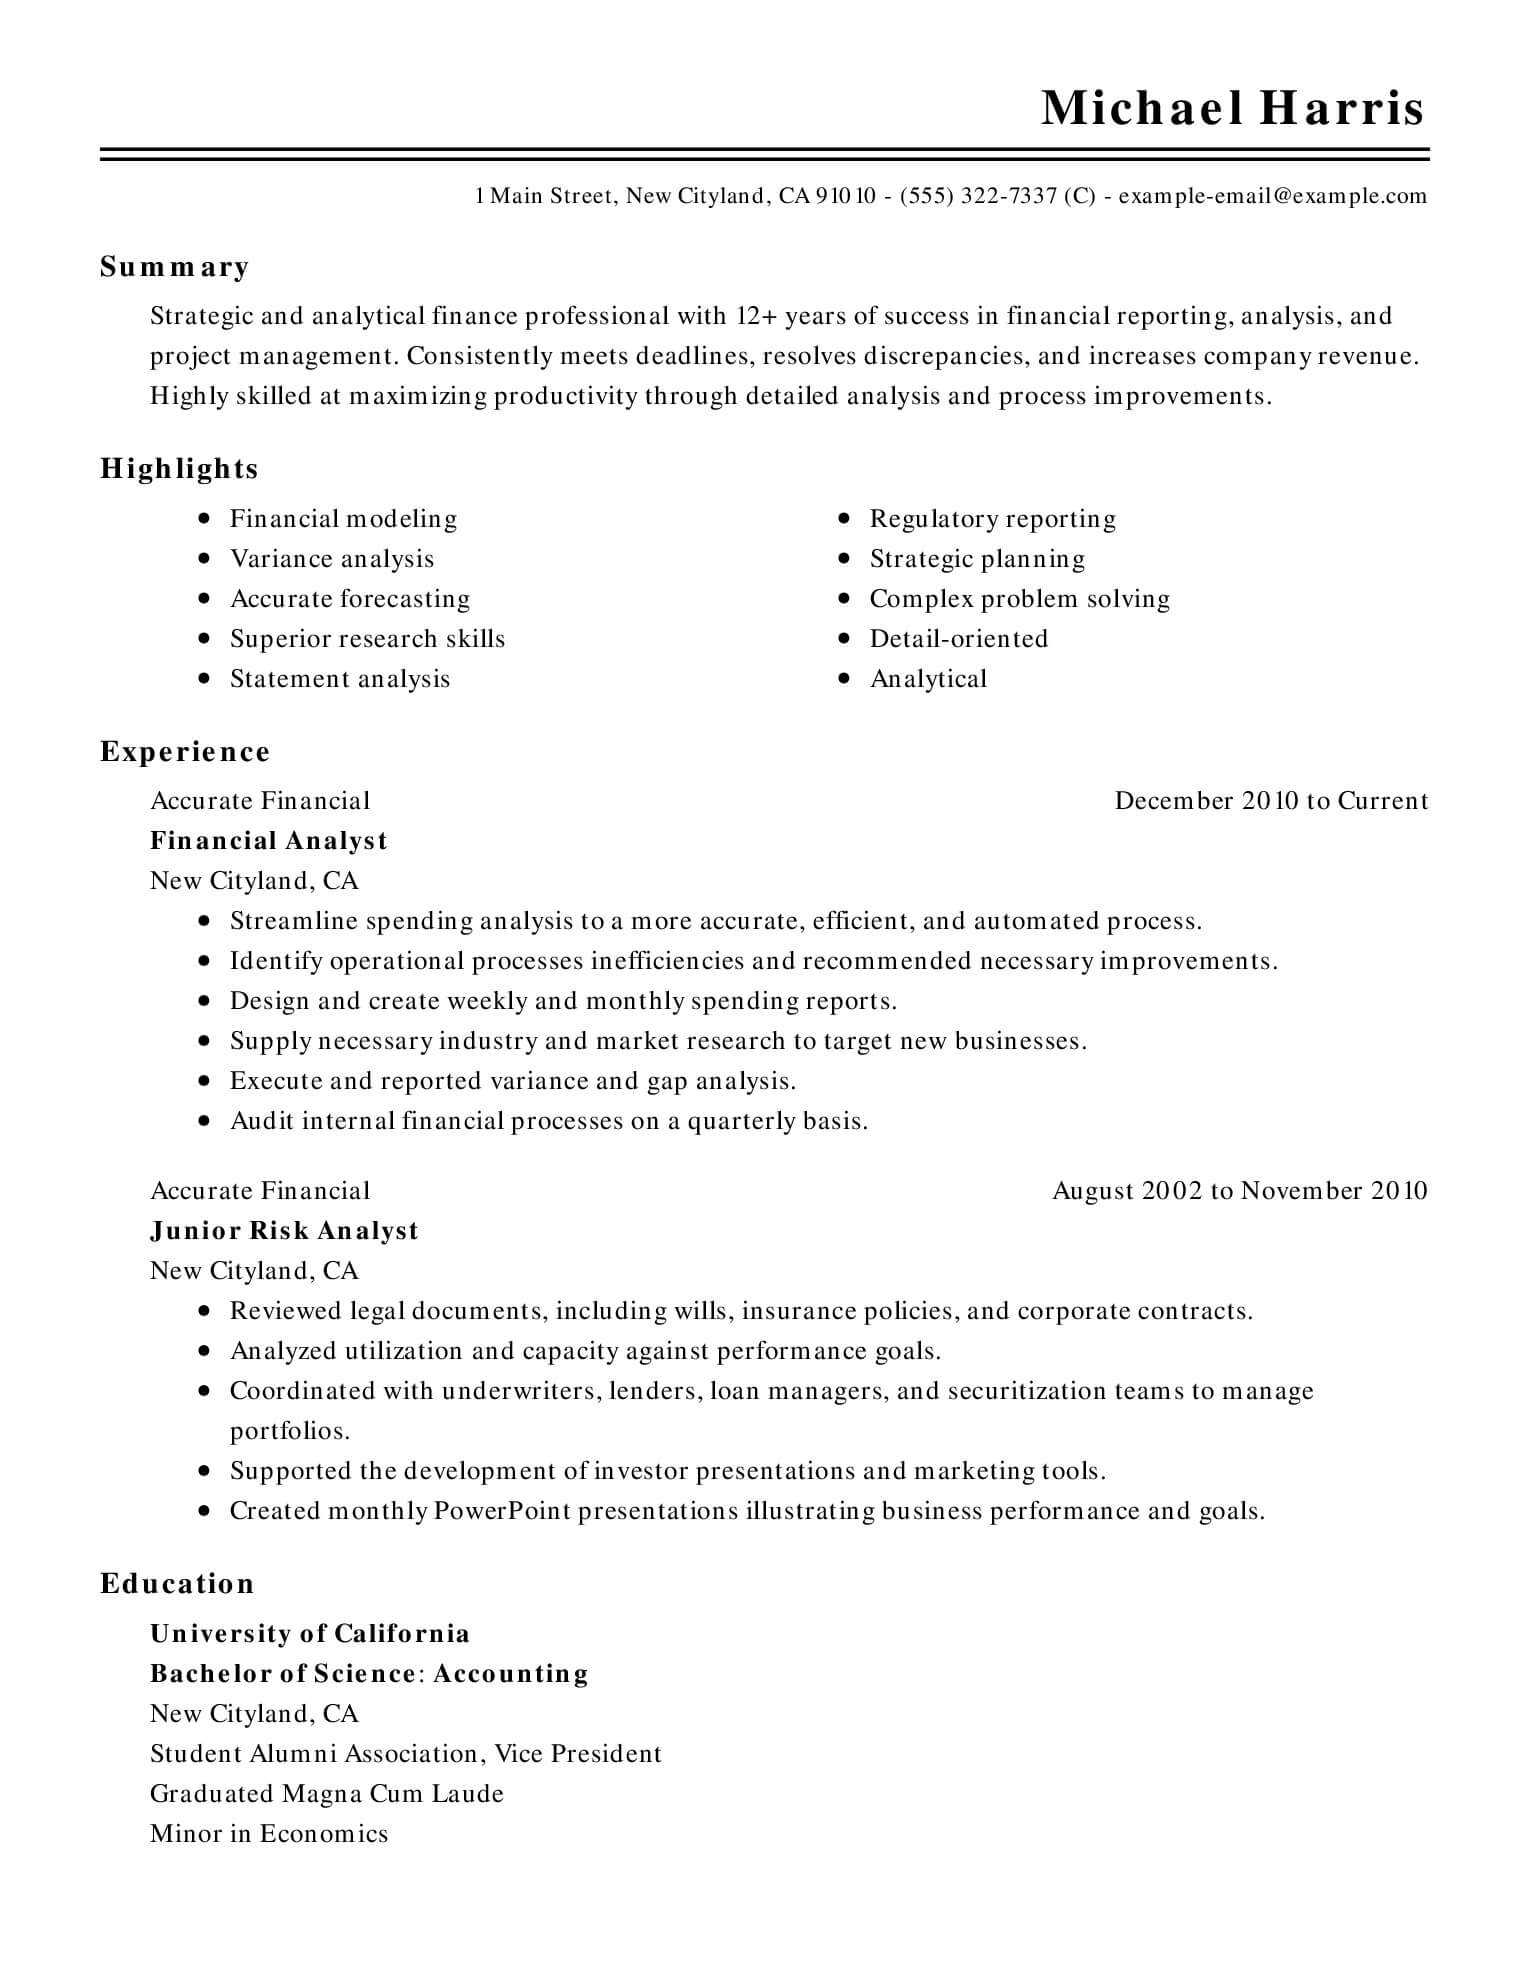 15 Of The Best Resume Templates For Microsoft Word Office With Resume Templates Microsoft Word 2010